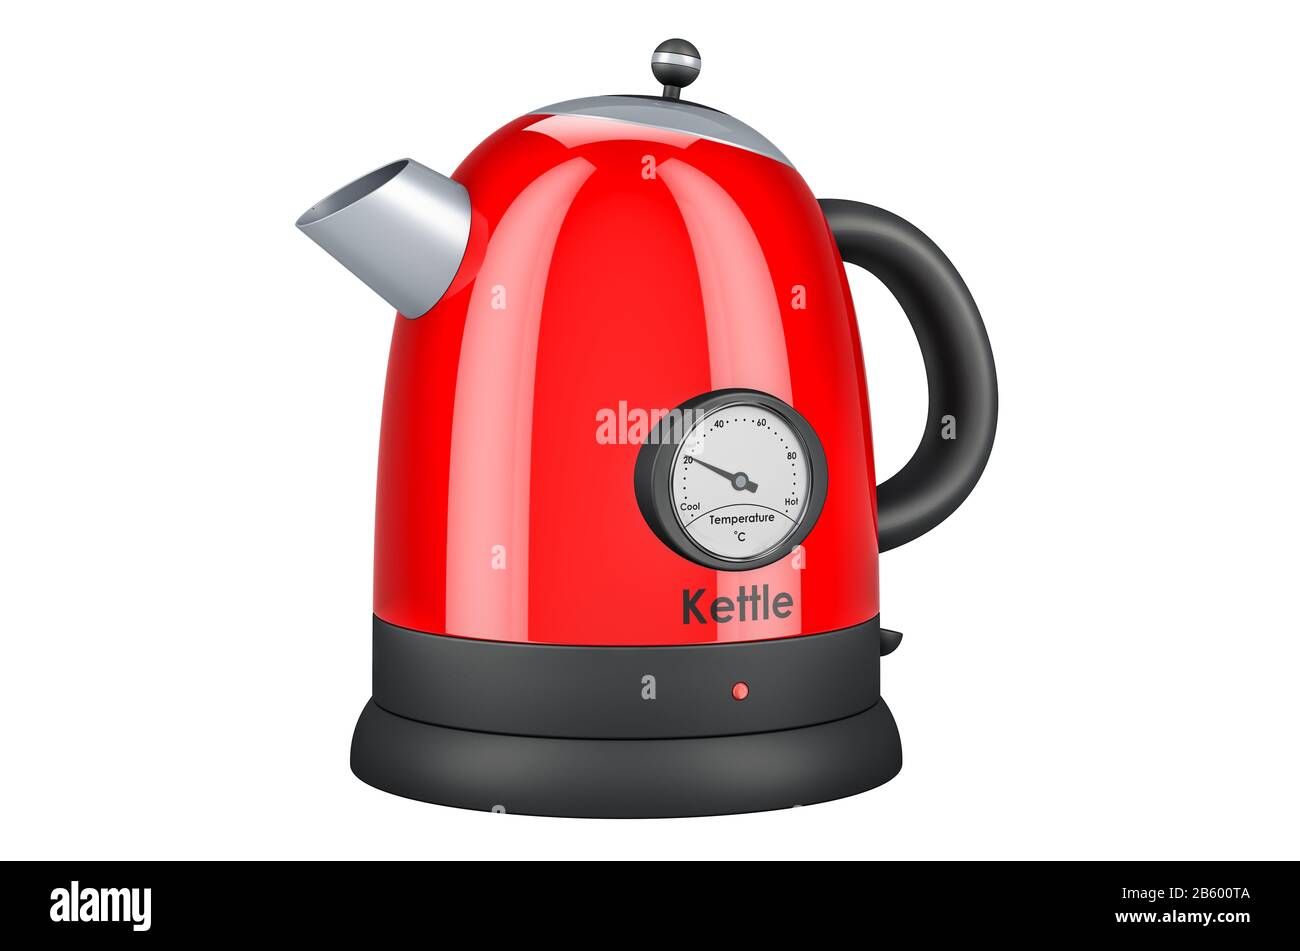 https://c8.alamy.com/comp/2B600TA/red-electric-kettle-with-temperature-control-retro-design-3d-rendering-isolated-on-white-backgroun-2B600TA.jpg